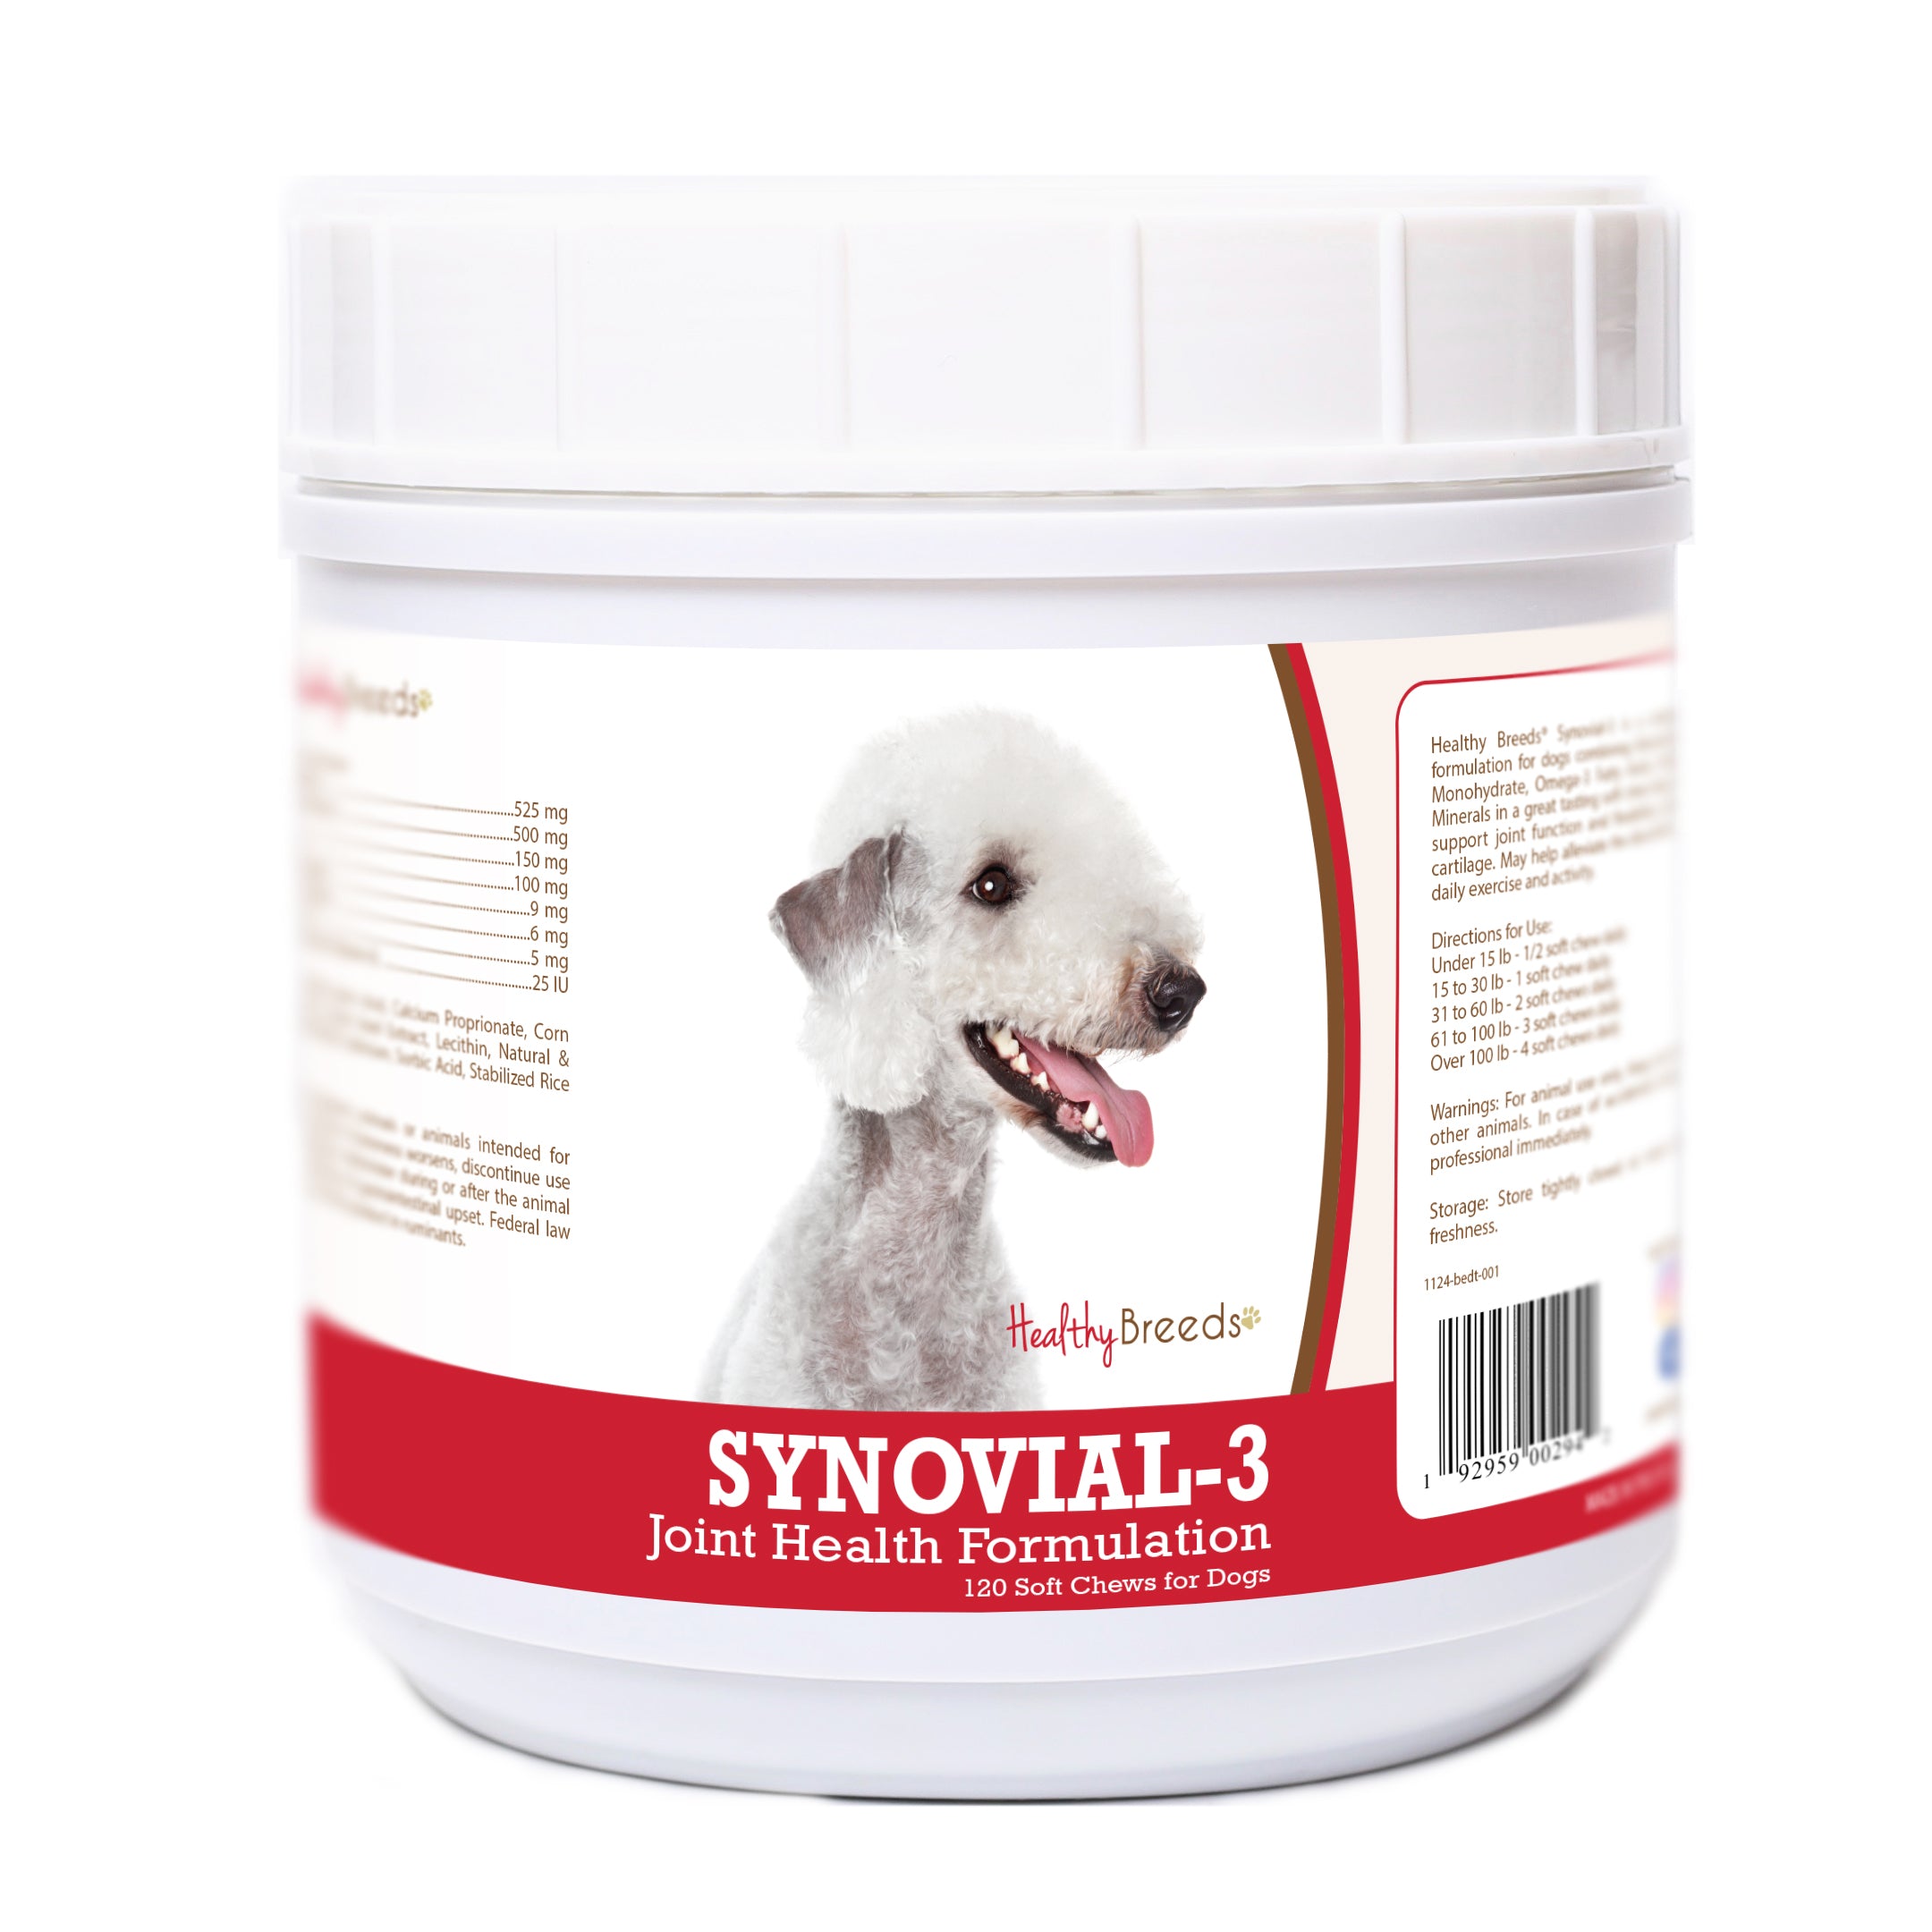 Bedlington Terrier Synovial-3 Joint Health Formulation Soft Chews 120 Count